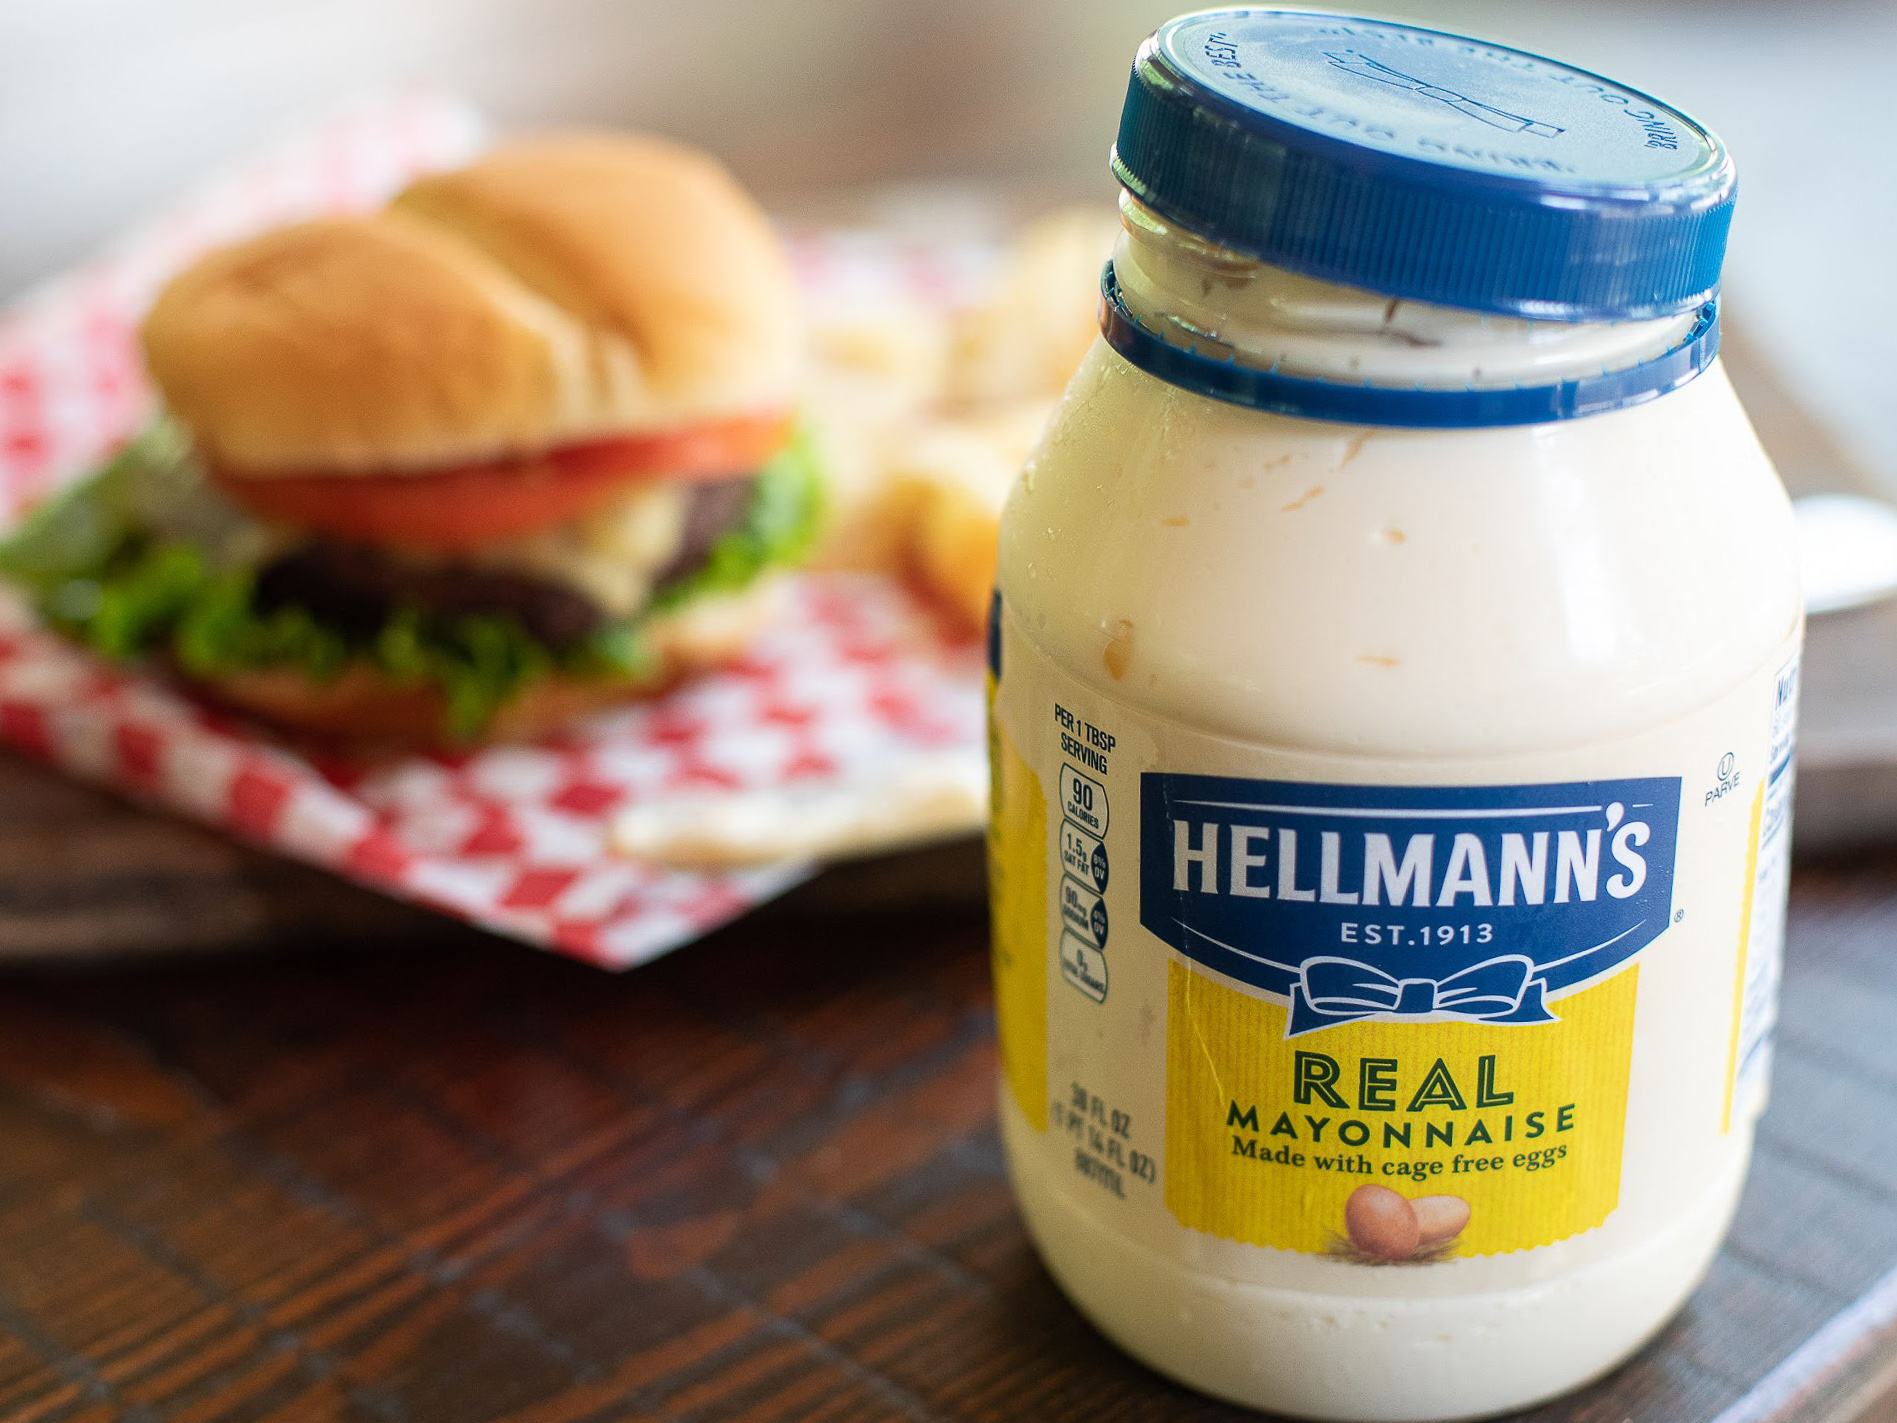 Don't Miss Your Chance To Get Big Savings On Hellmann's Mayonnaise - Save $2 Now At Publix on I Heart Publix